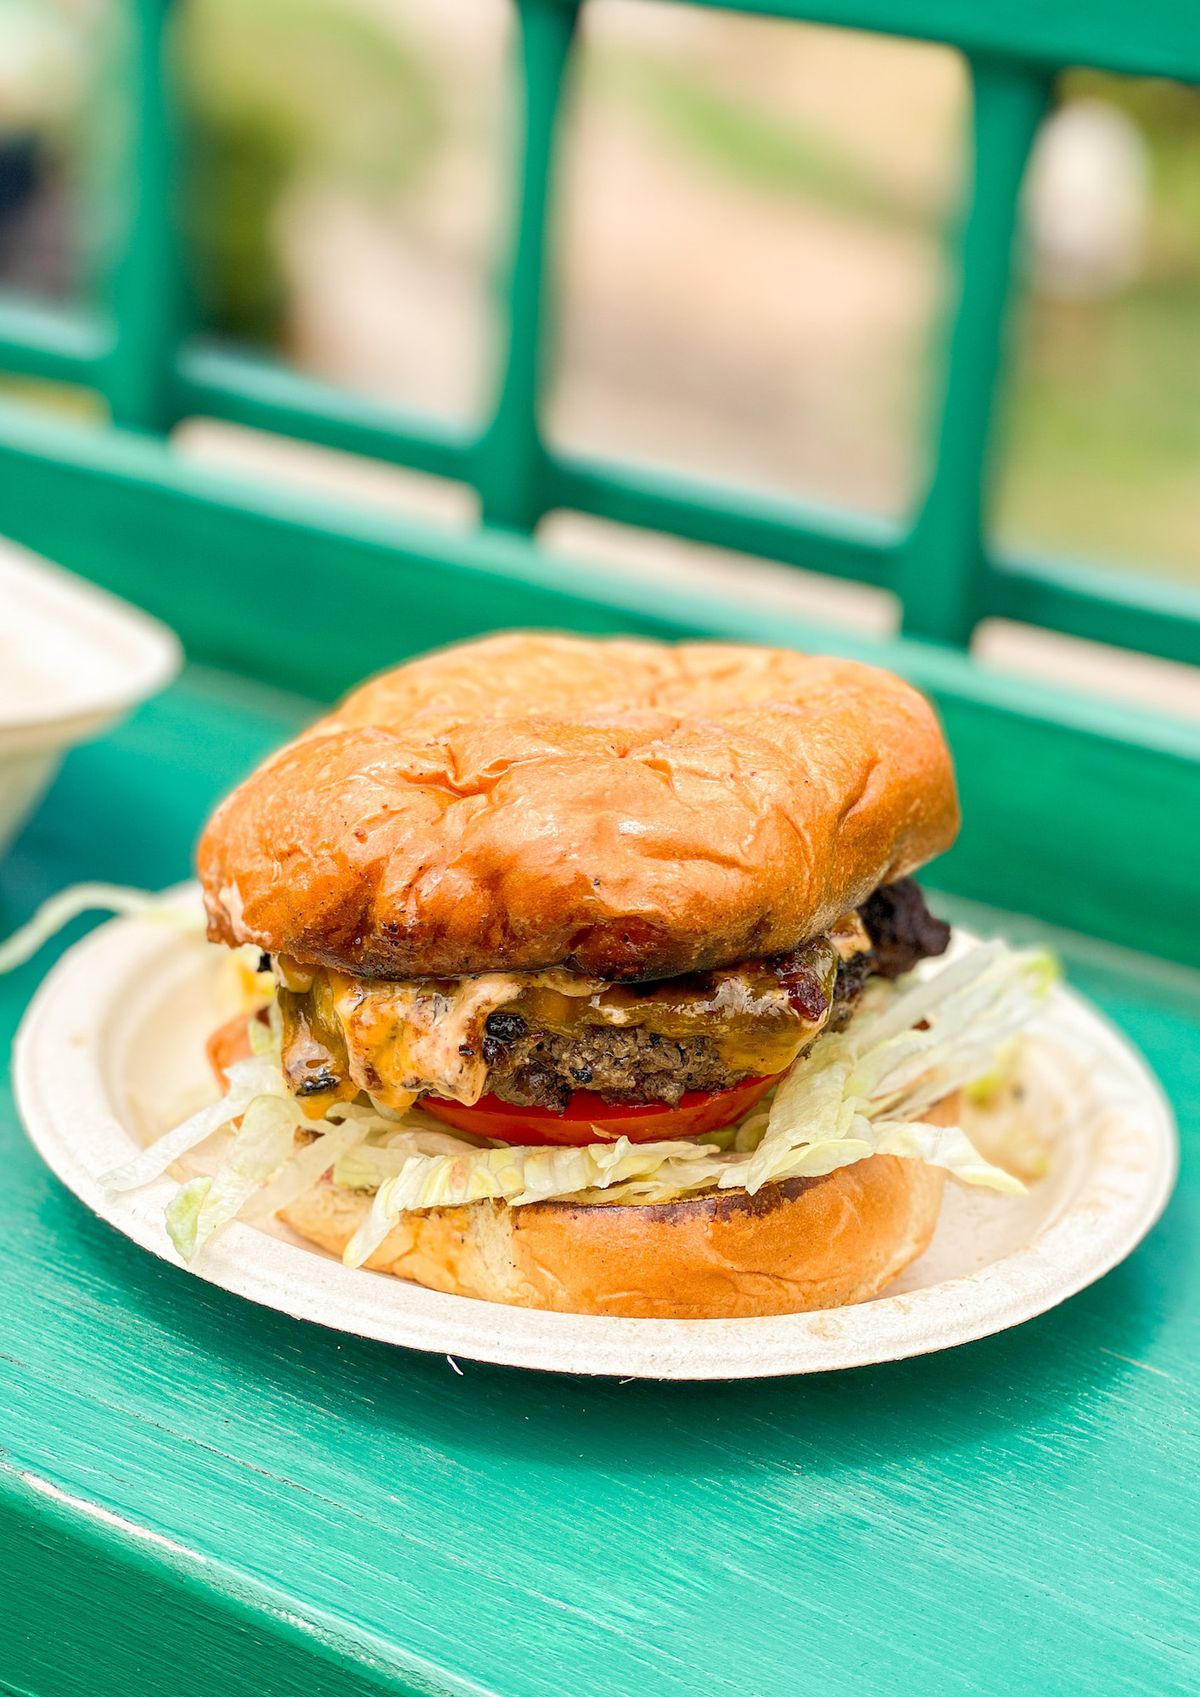 A backyard-style burger with dark edges and vegetables on a browned bun, shown up close.